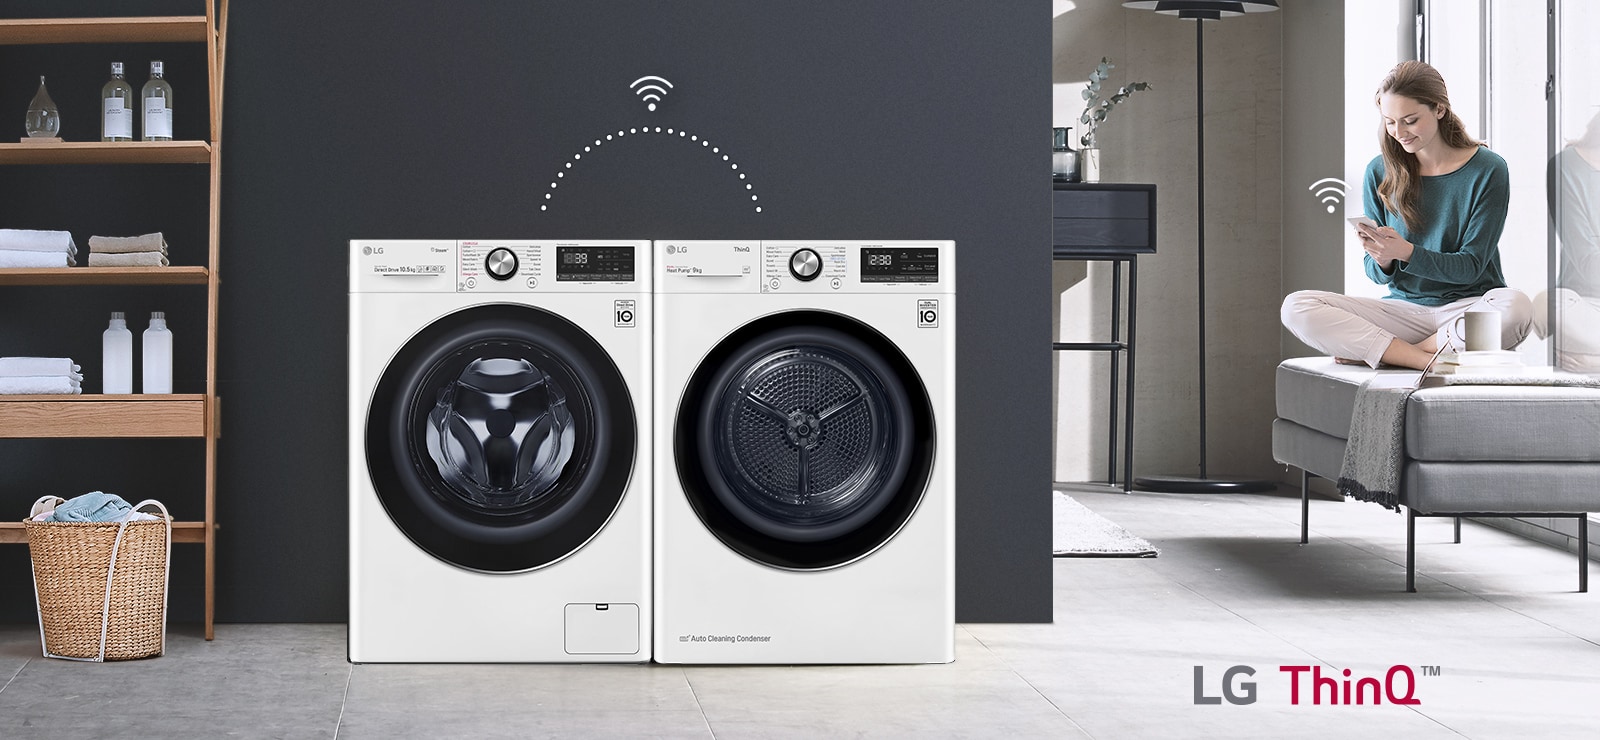 User just sits on the couch and controls dryer and Washer (washing machine) by LG ThinQ app.